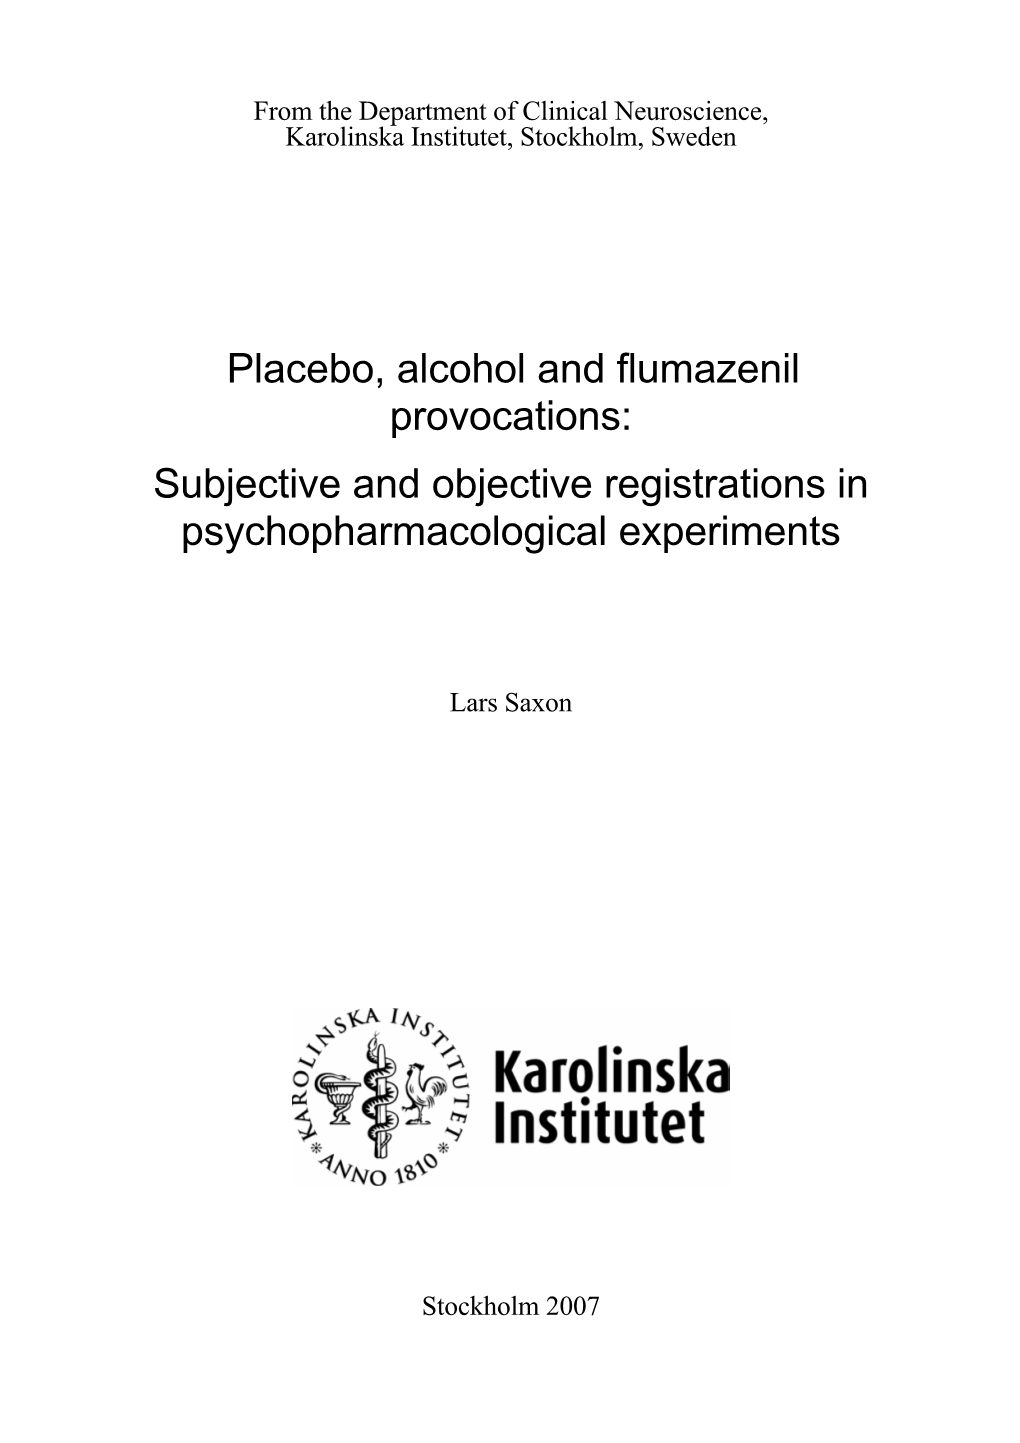 Placebo, Alcohol and Flumazenil Provocations: Subjective and Objective Registrations in Psychopharmacological Experiments